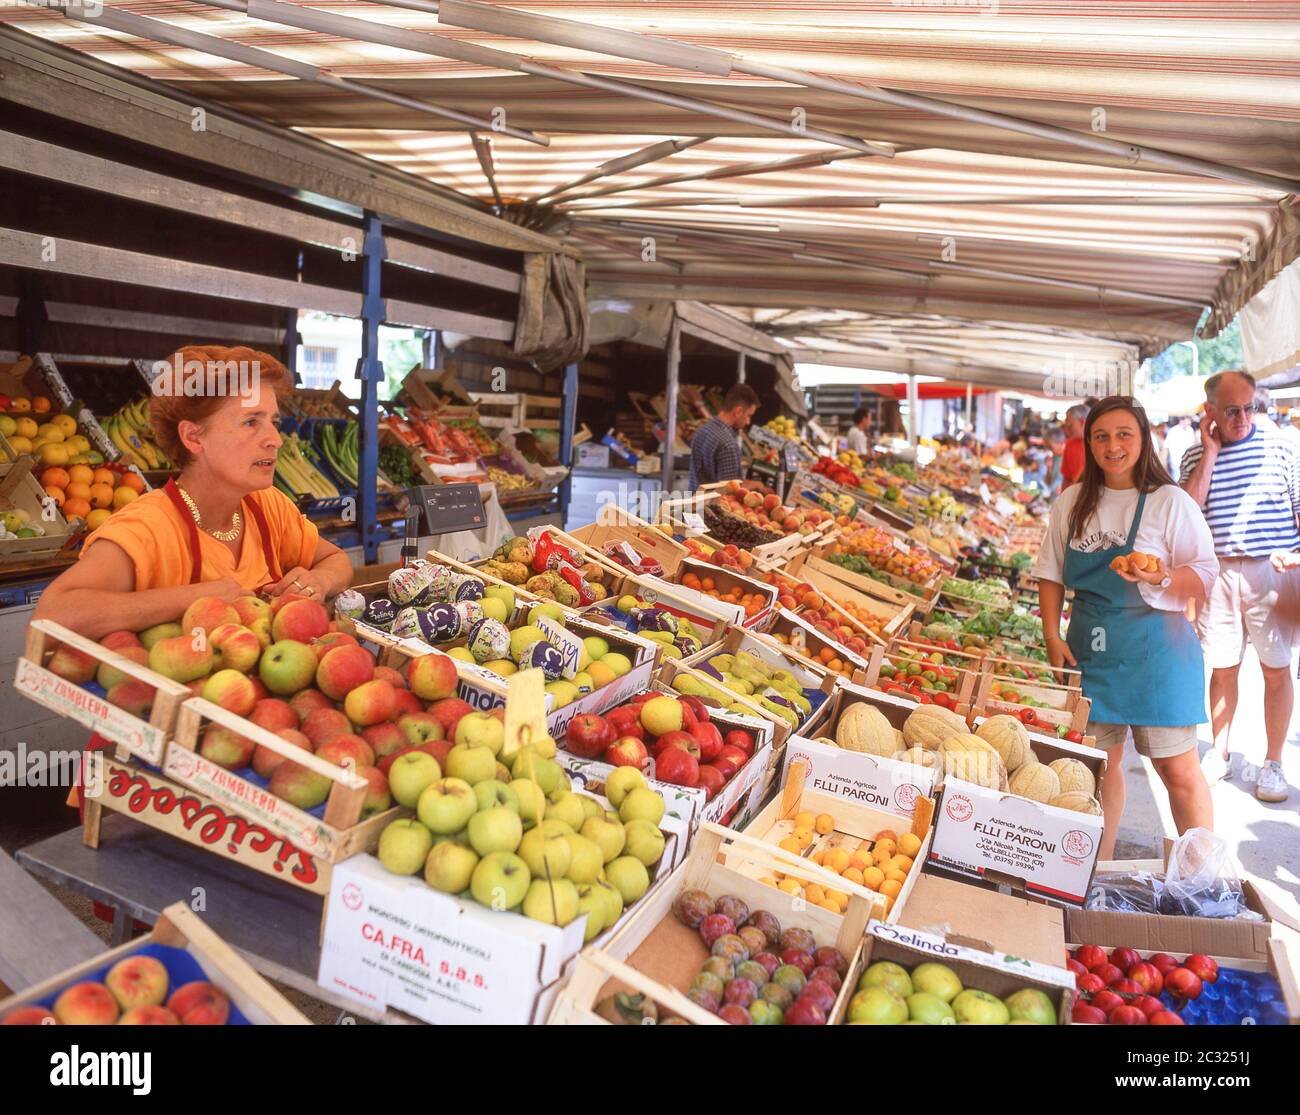 Fruit and vegetable stall in outdoor market, Baveno, Province of Verbano-Cusio-Ossola, Piemonte (Piedmont) Region, Italy Stock Photo